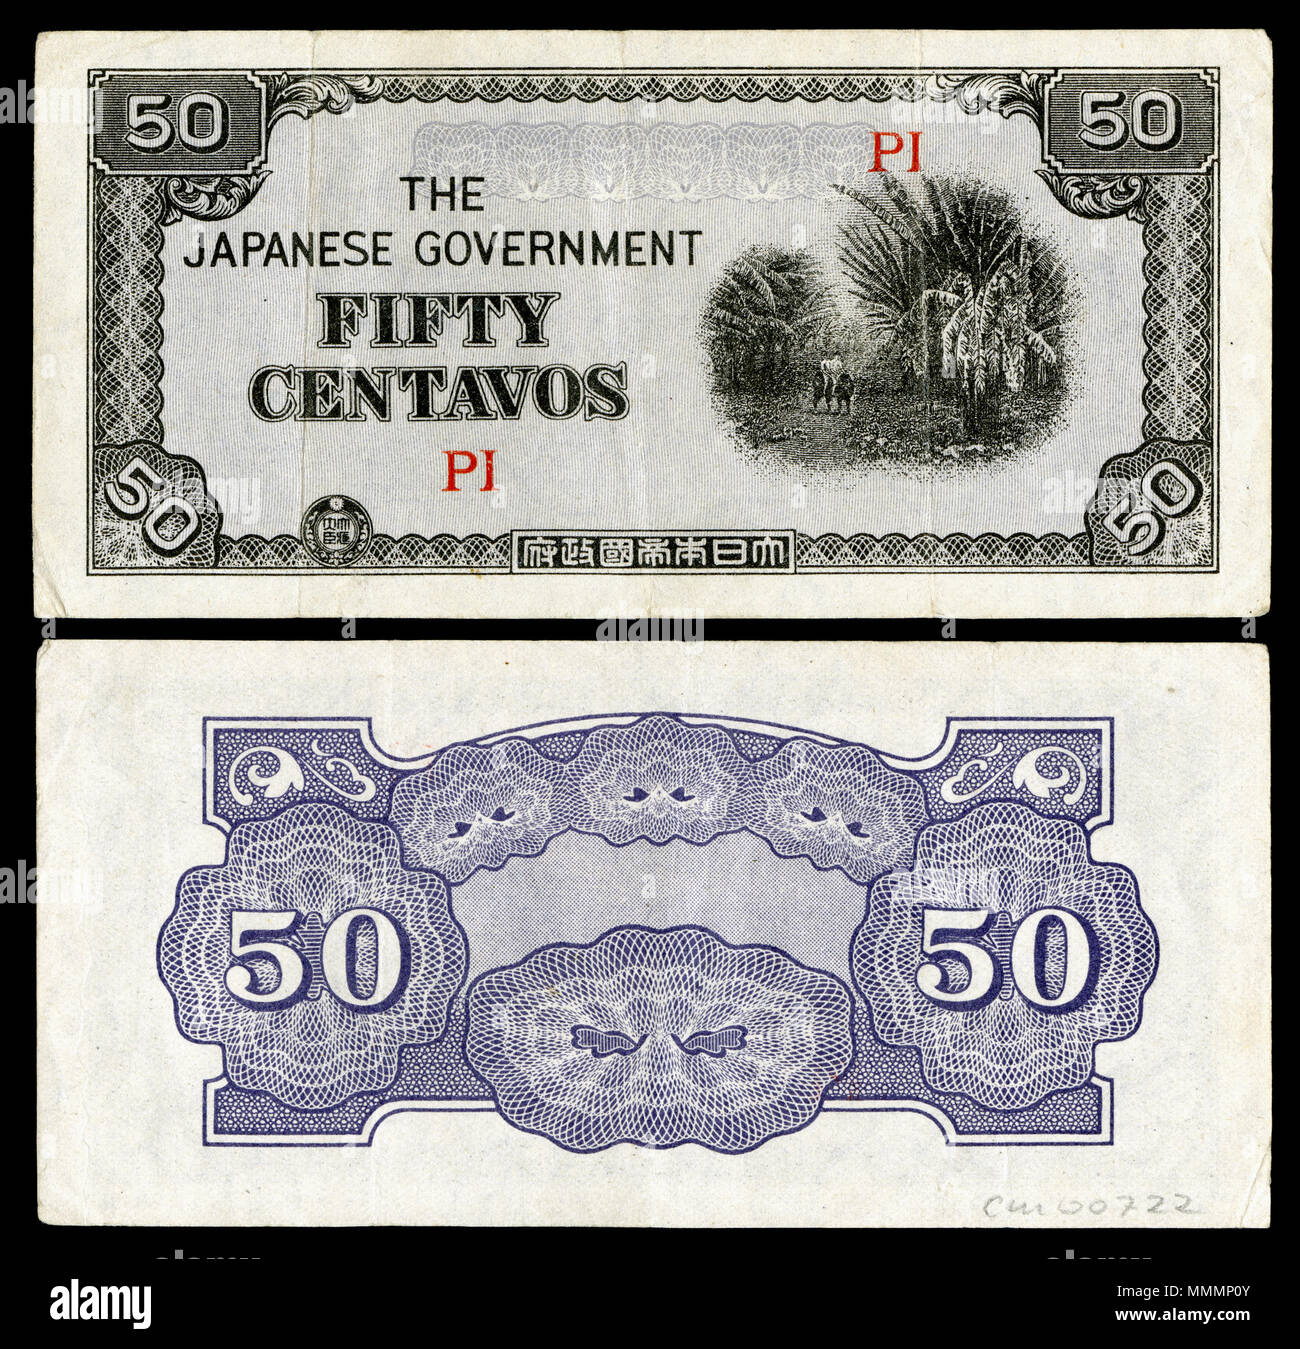 . English: Japanese Government (Philippines)-50 Centavos (1942) The Japanese government-issued Philippine peso, part of the Japanese invasion money of World War II, was issued between 1942 and 1945 by the occupying Japanese government.  . 19 August 2014, 15:09:41. Empire of Japan  National Museum of American History -�   Native name National Museum of American History  Parent institution Smithsonian Affiliations  Location Washington, D.C., United States of America  Coordinates 38-�-���-�.68��-� 77-�-���-���-�  Established 1964  Web page americanhistory.si.edu  Authority control  : Q148584 VIAF Stock Photo